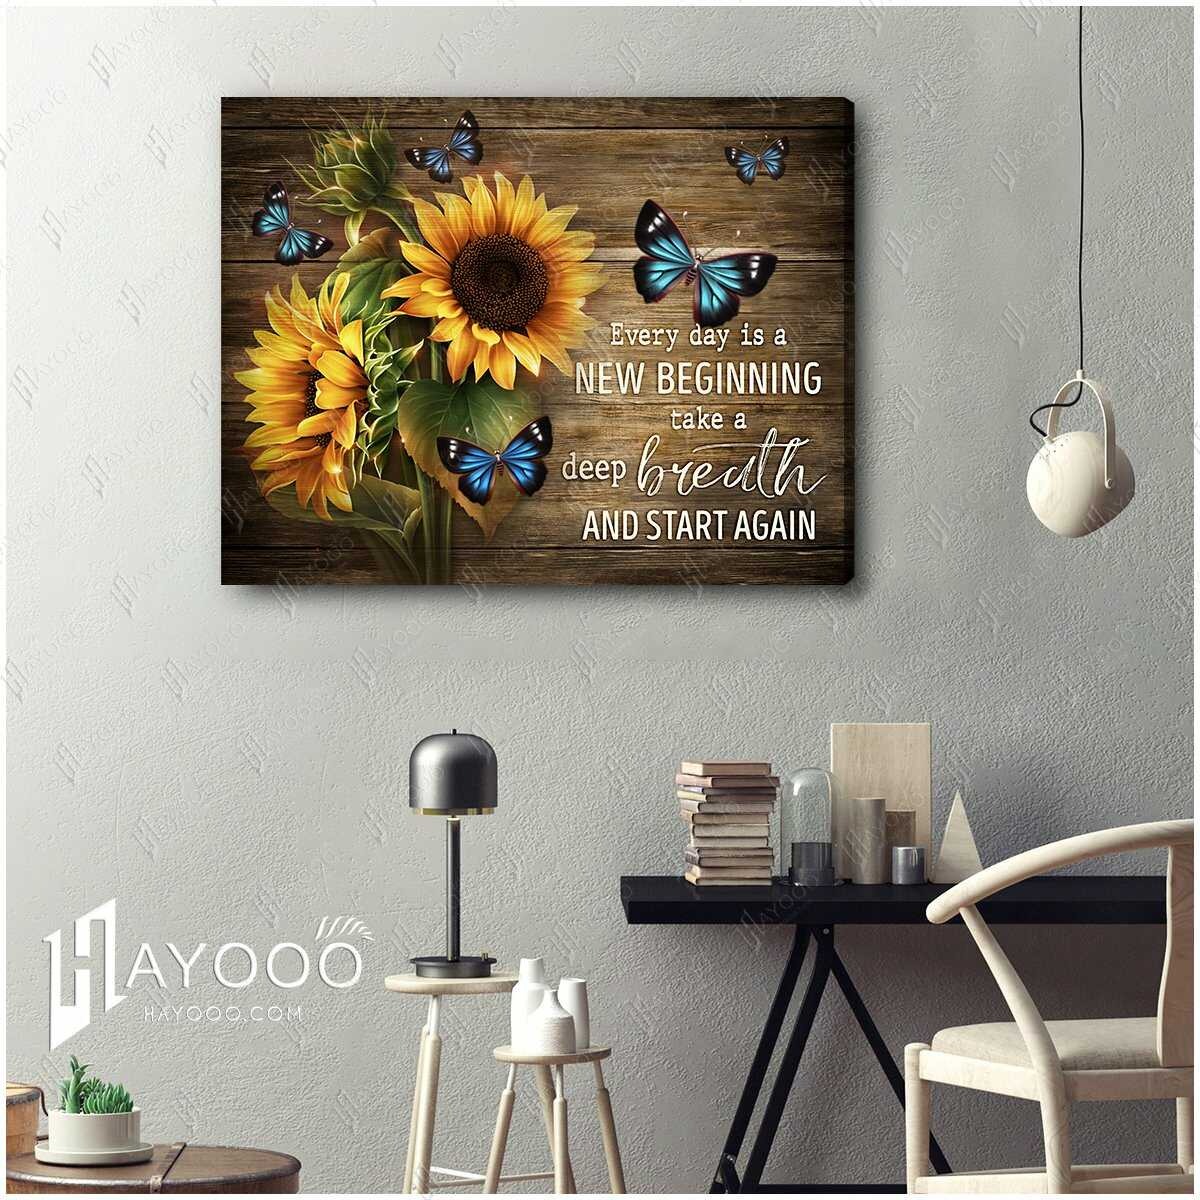 Sunflower butterfly every day is new begging take a deep breath and start again canvas 4